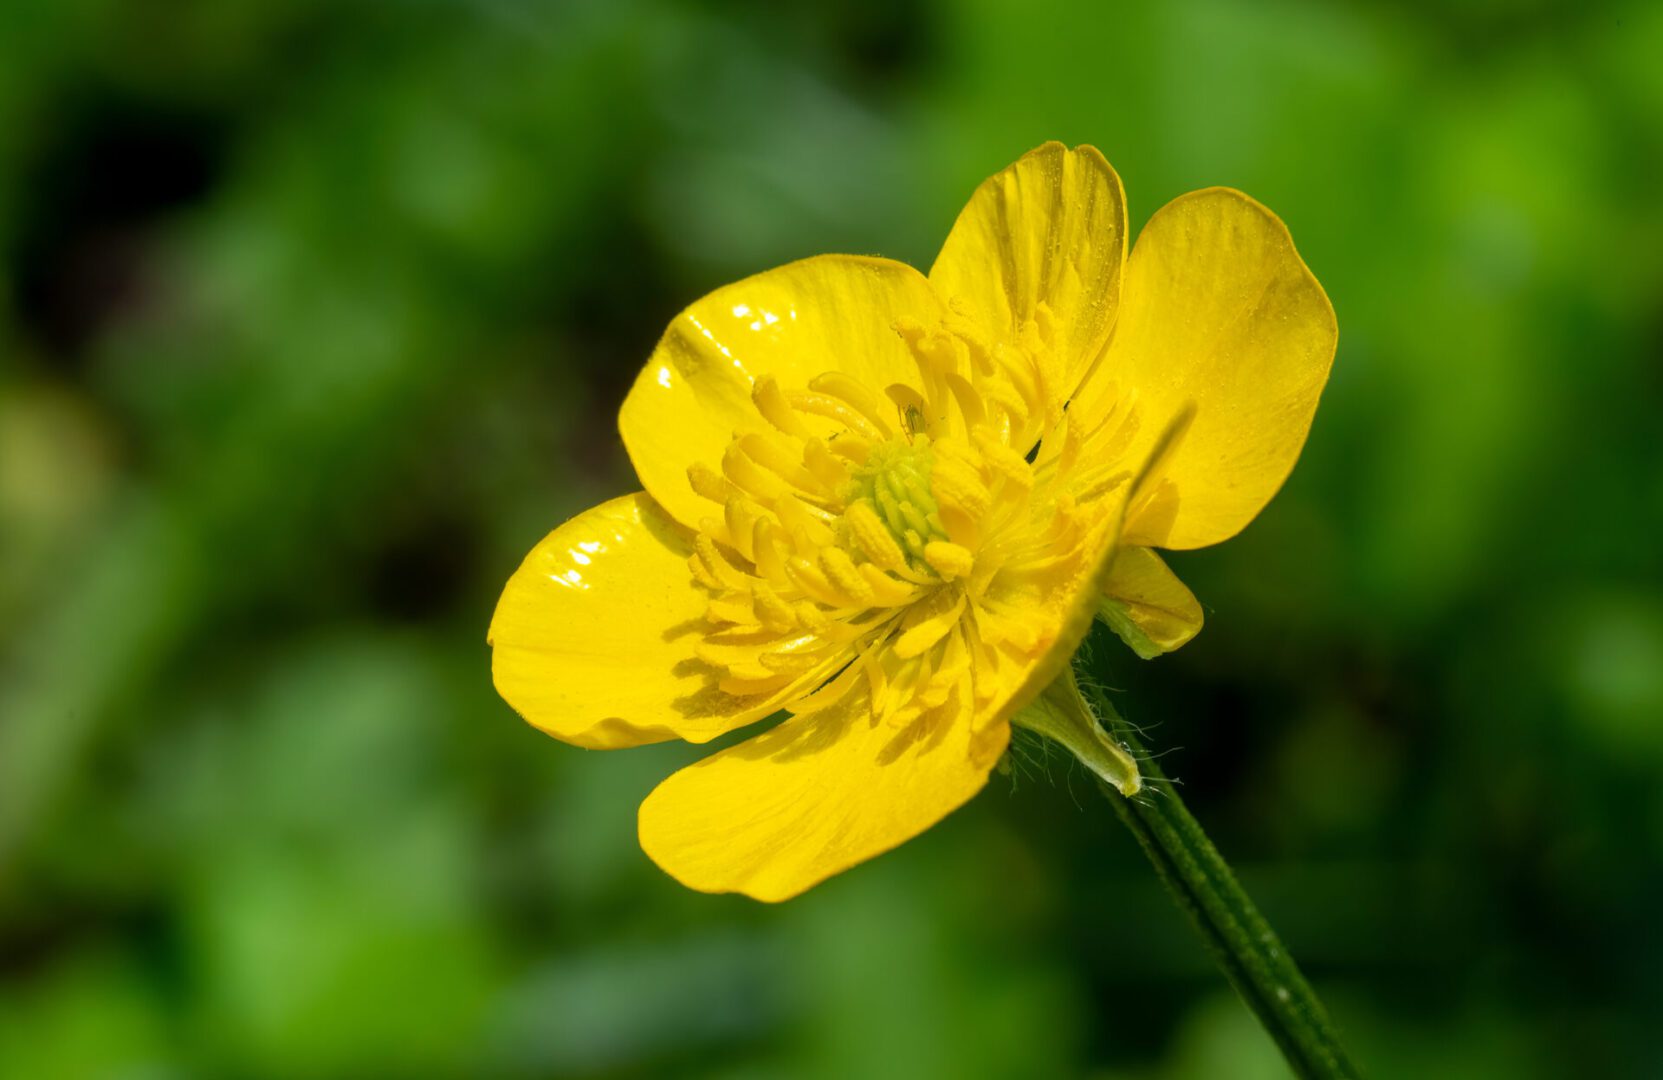 A close up of the yellow flower of a plant